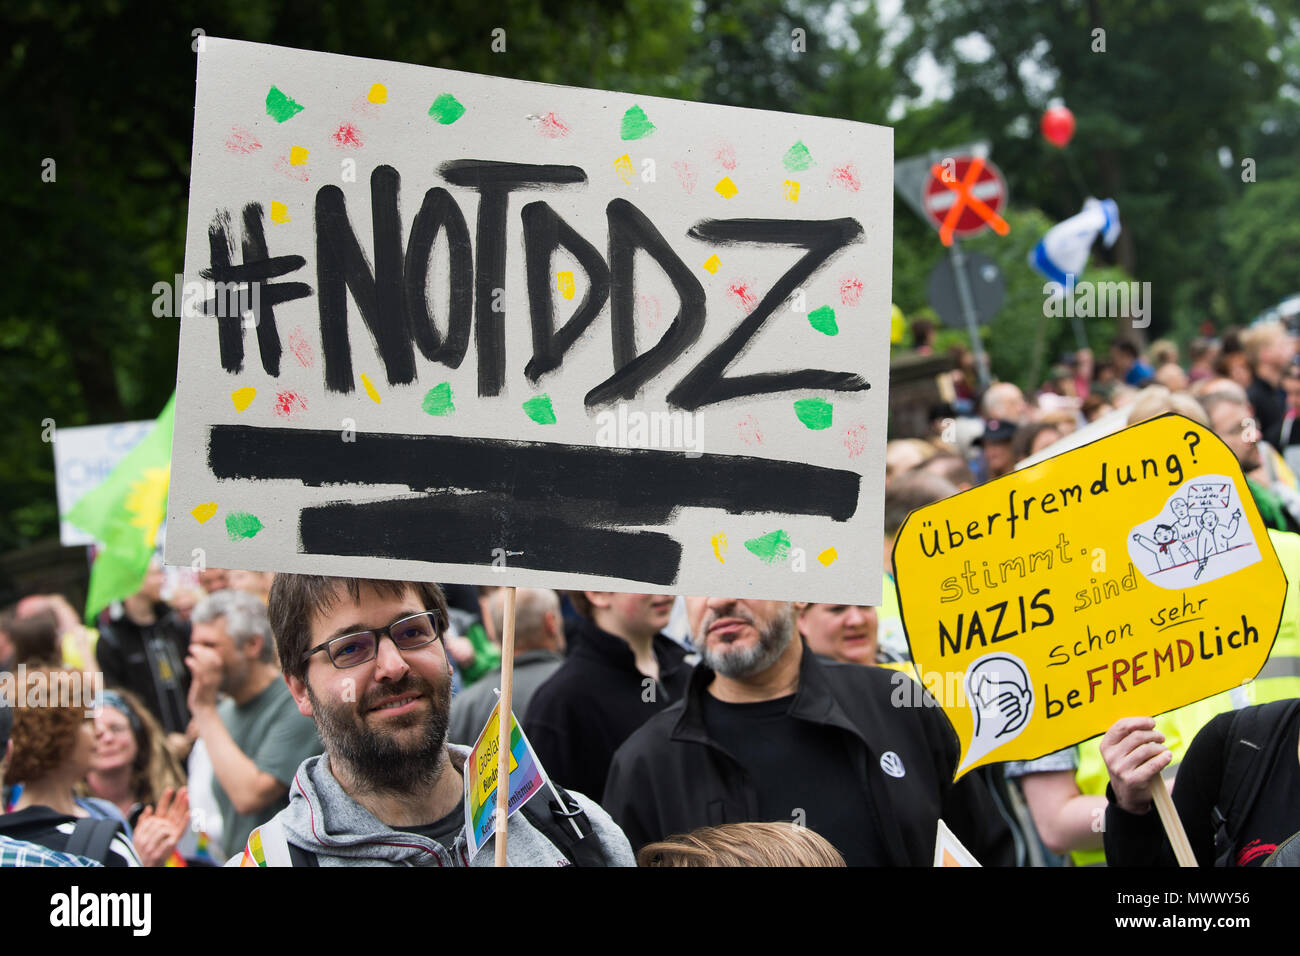 Goslar, Germany. 2nd June 2018. A counter-protester holds up a sign reading '#NOTDDZ' (abbreviation of 'No day of German future'), negating the slogan of a nearby Nazi march. The Goslar Alliance Against Right-Wing Extremism is countering the demonstration 'Day of German future' with their own demonstration titled 'Goslar's future stays colourful - No place for racism!'. Photo: Swen Pförtner/dpa Credit: dpa picture alliance/Alamy Live News Stock Photo